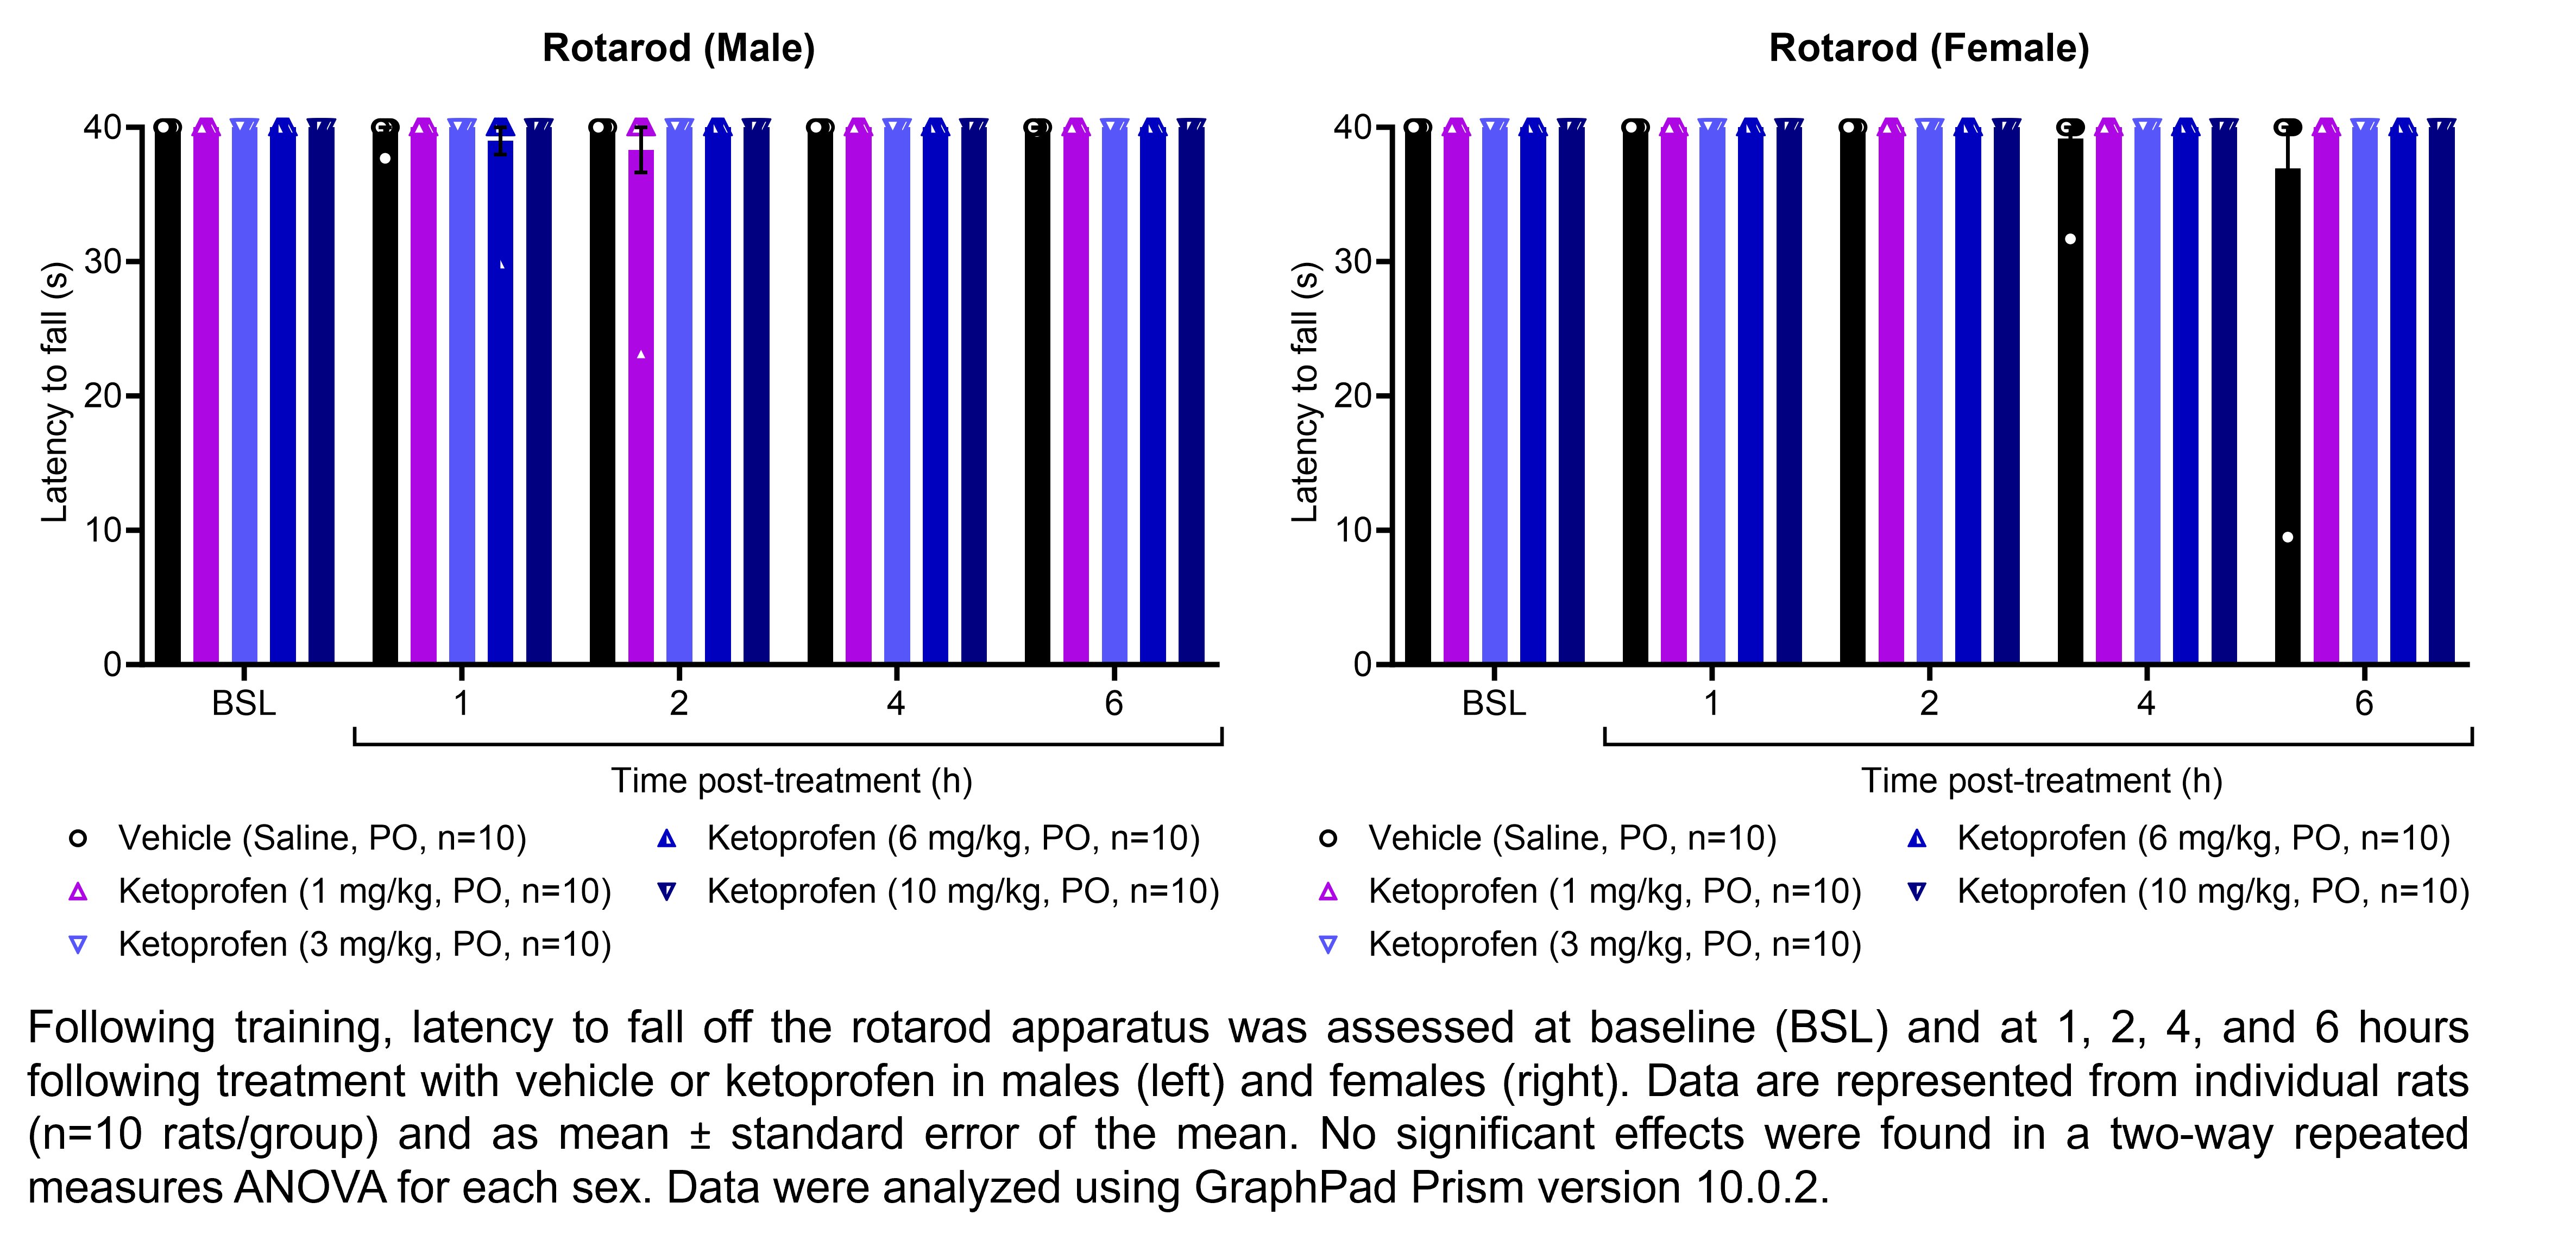 Two graphs show the latency for male or female rats to fall off a rotarod apparatus. Responses are shown at the following time points: baseline (before treatment) and at 1, 2, 4, and 6 hours after treatment with vehicle (saline, delivered PO) or ketoprofen (1, 3, 6, or 10 mg/kg, delivered PO). There were 10 rats per group. No significant effects were found in a two-way repeated measures ANOVA for either sex. Data were analyzed using GraphPad Prism version 10.0.2